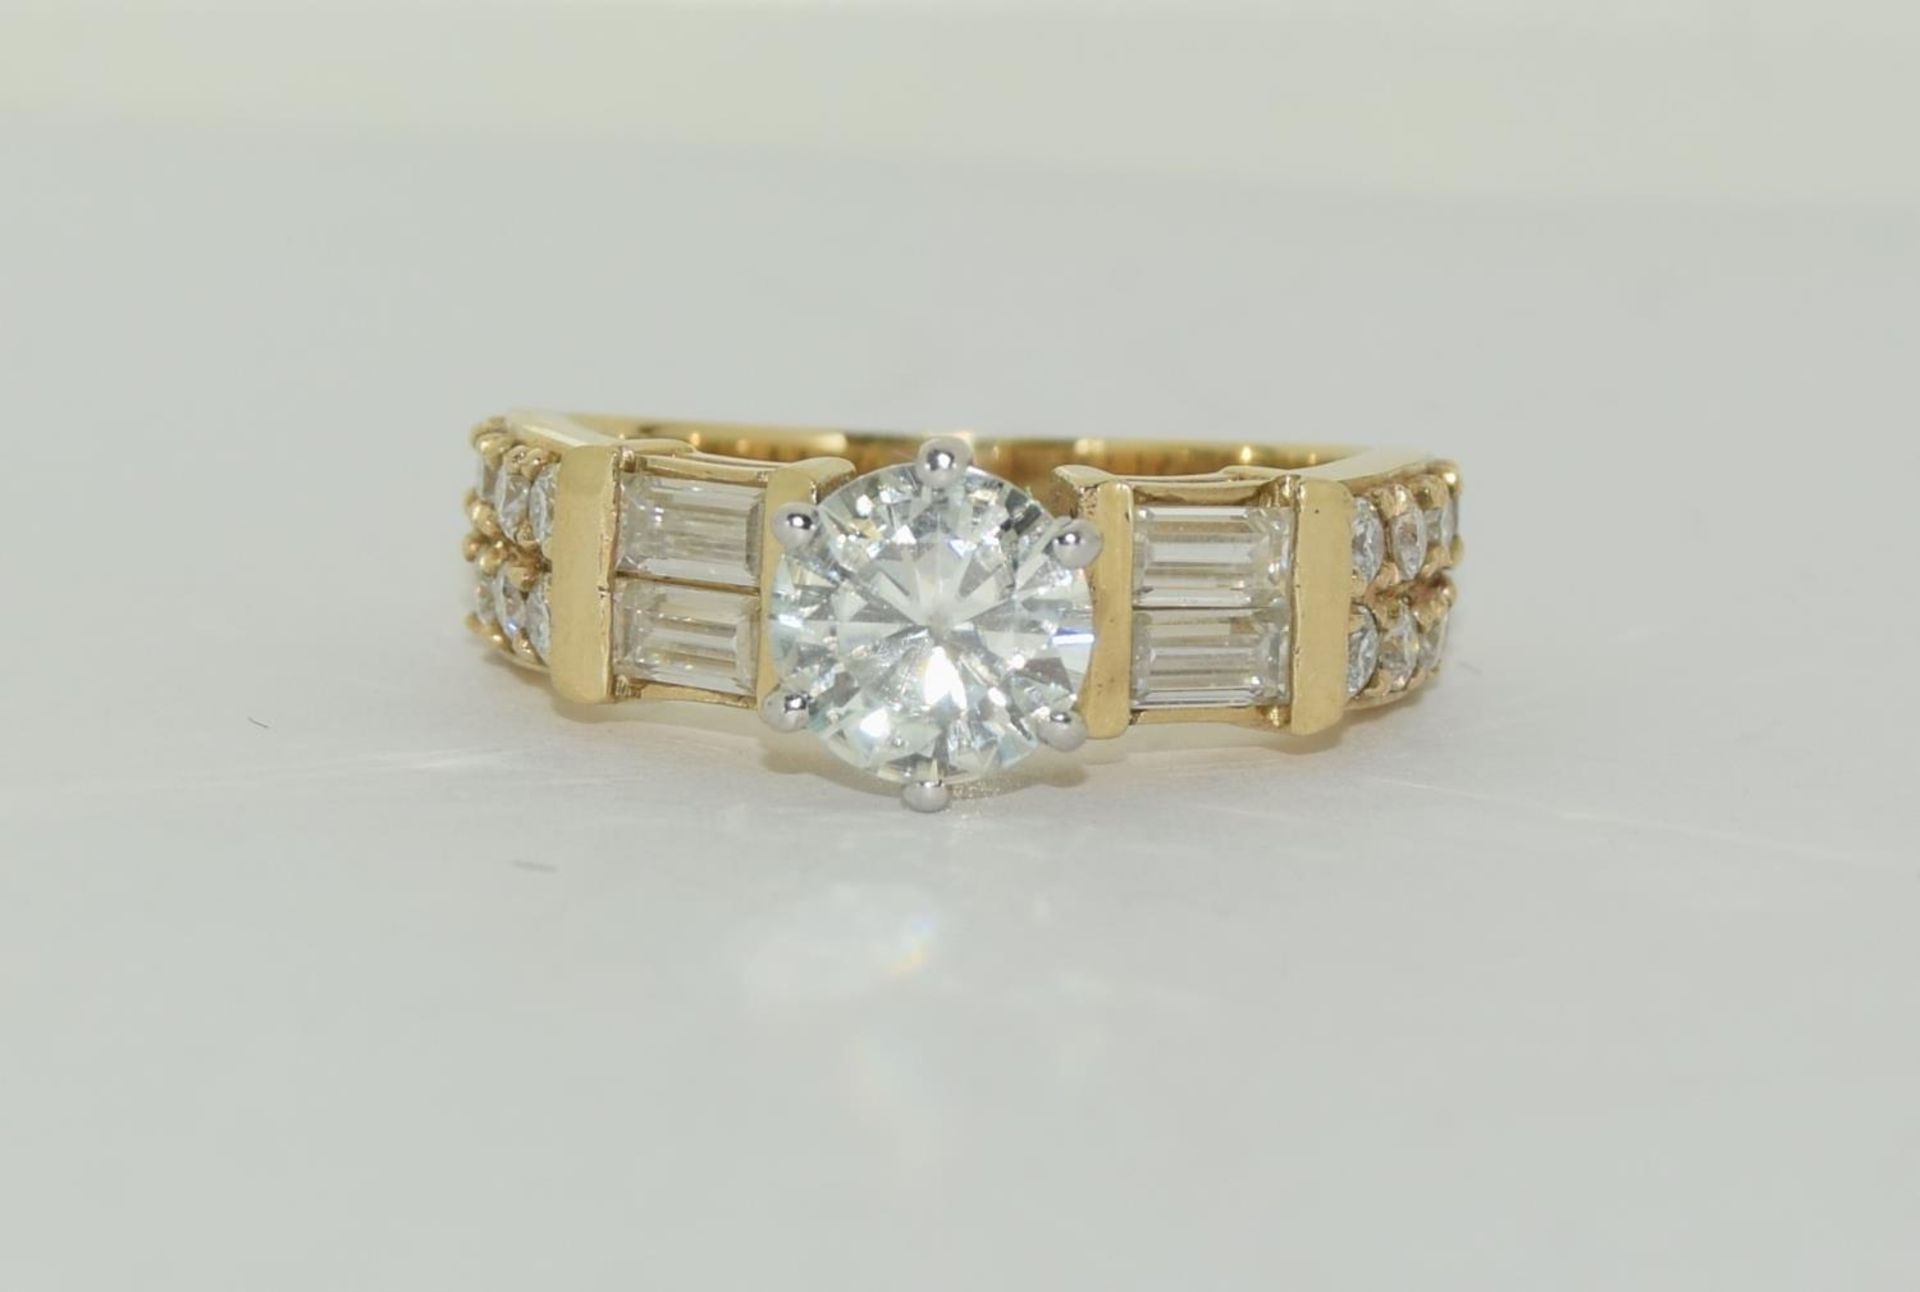 9ct gold Moissanite Diamond ring - 1.00ct centre stone, baguette/round stones on sides. Size M+.